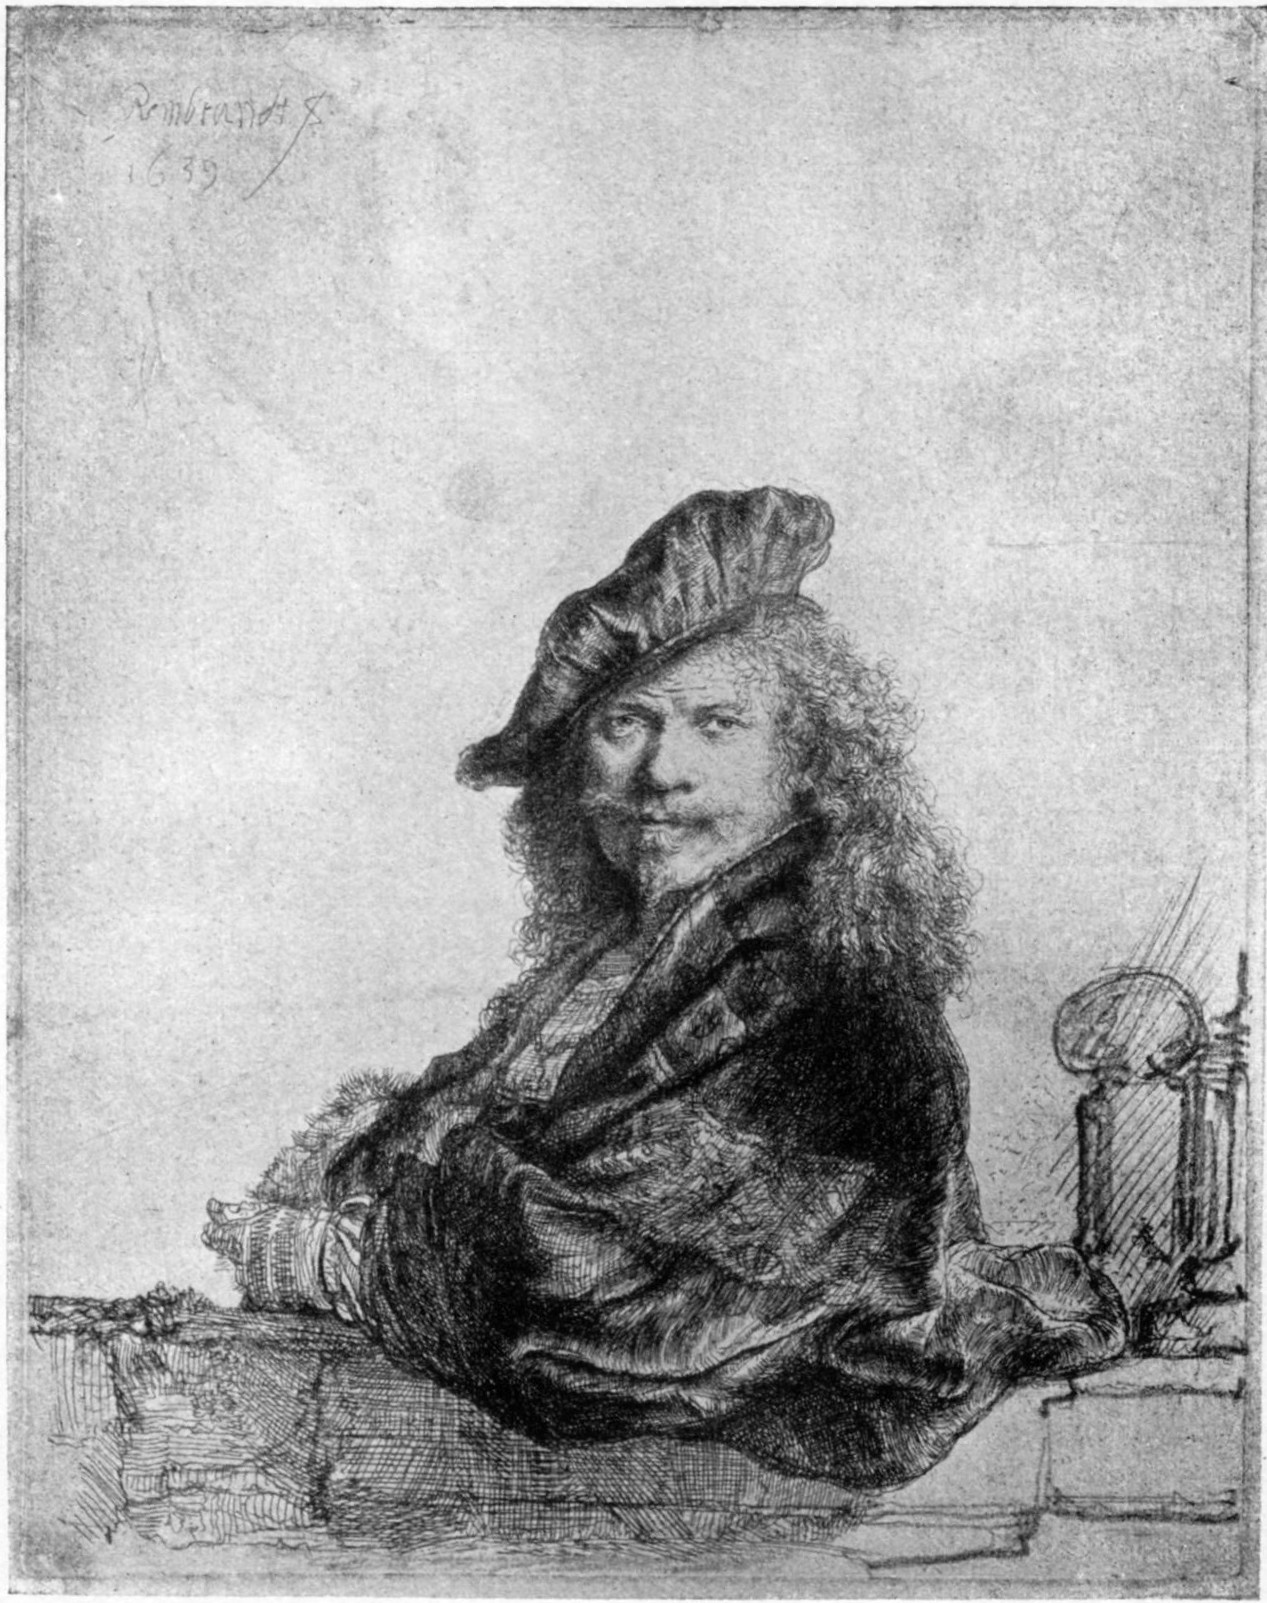 168, I. REMBRANDT LEANING ON A STONE SILL. 1639. B. 21 From an impression touched by the artist in black chalk